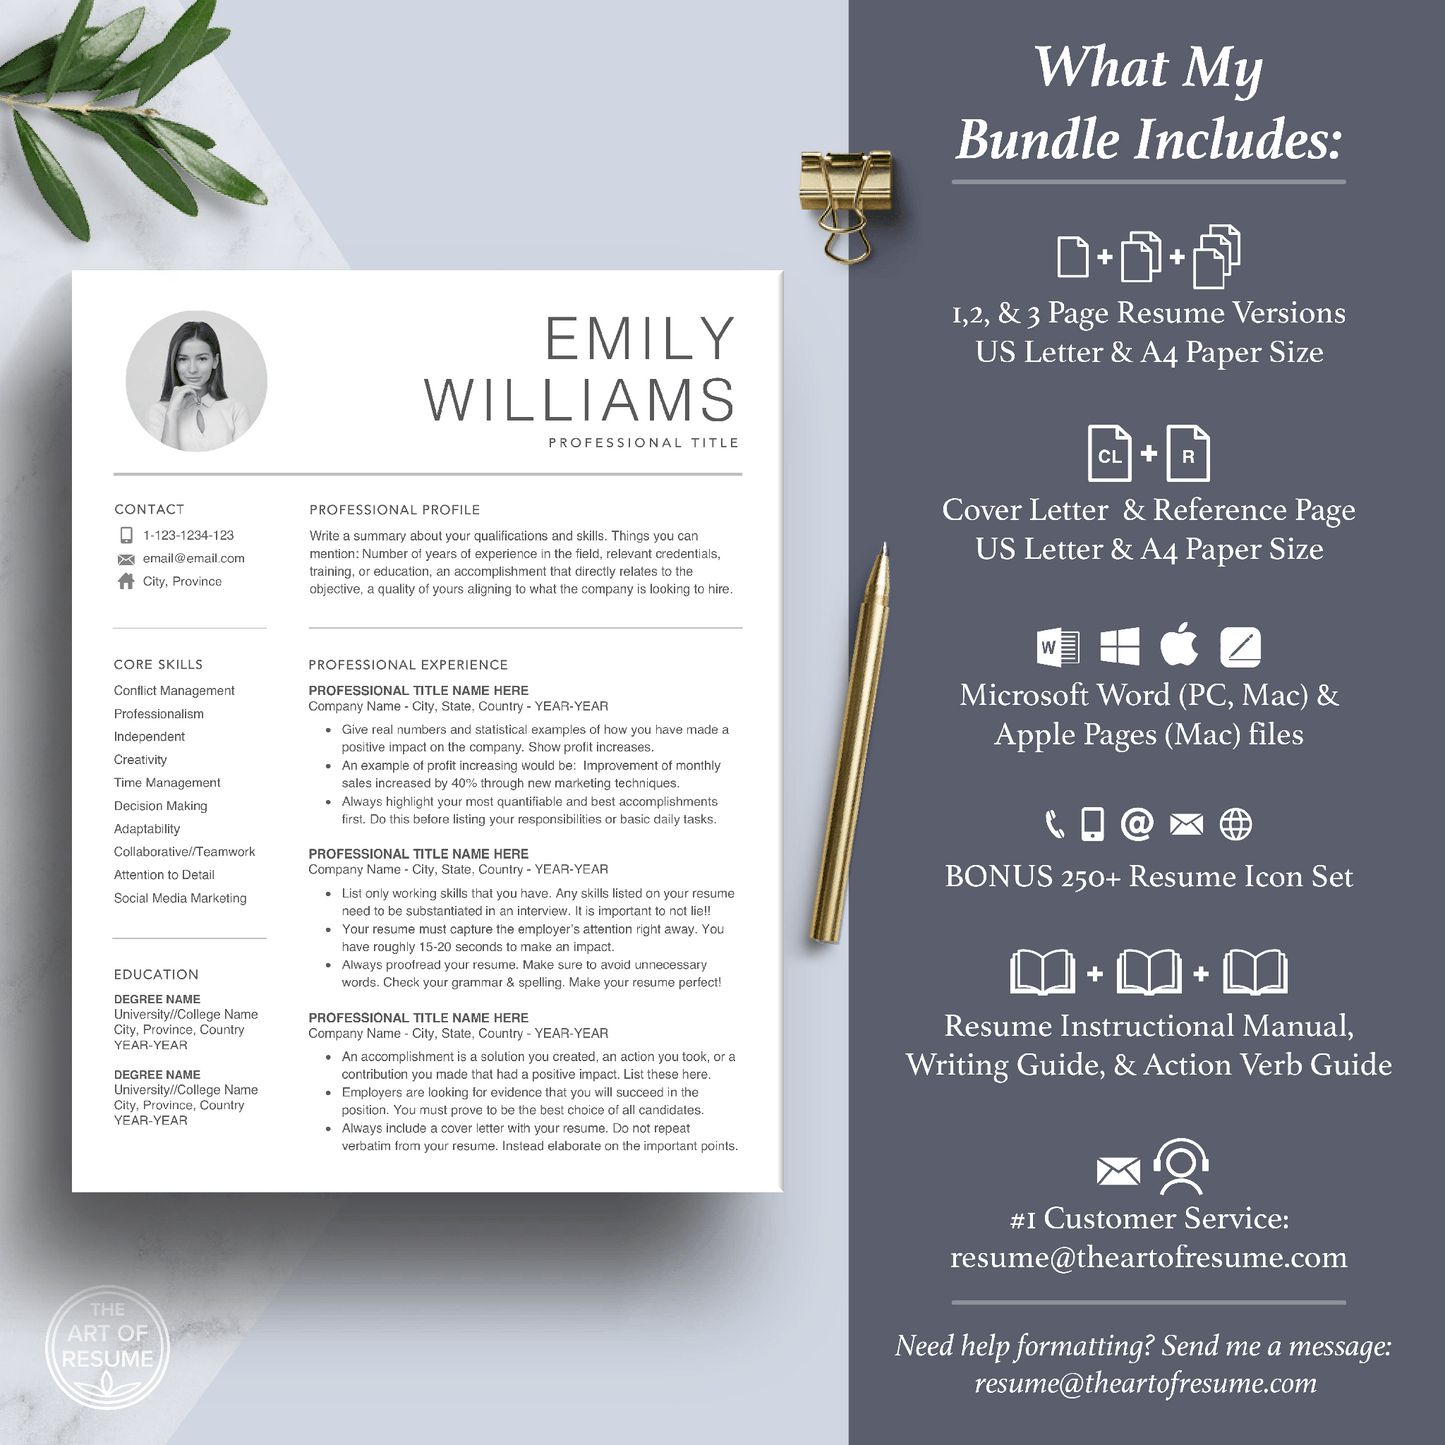 Resume Design with Photo | Executive Resume Design | Cover Letter - The Art of Resume